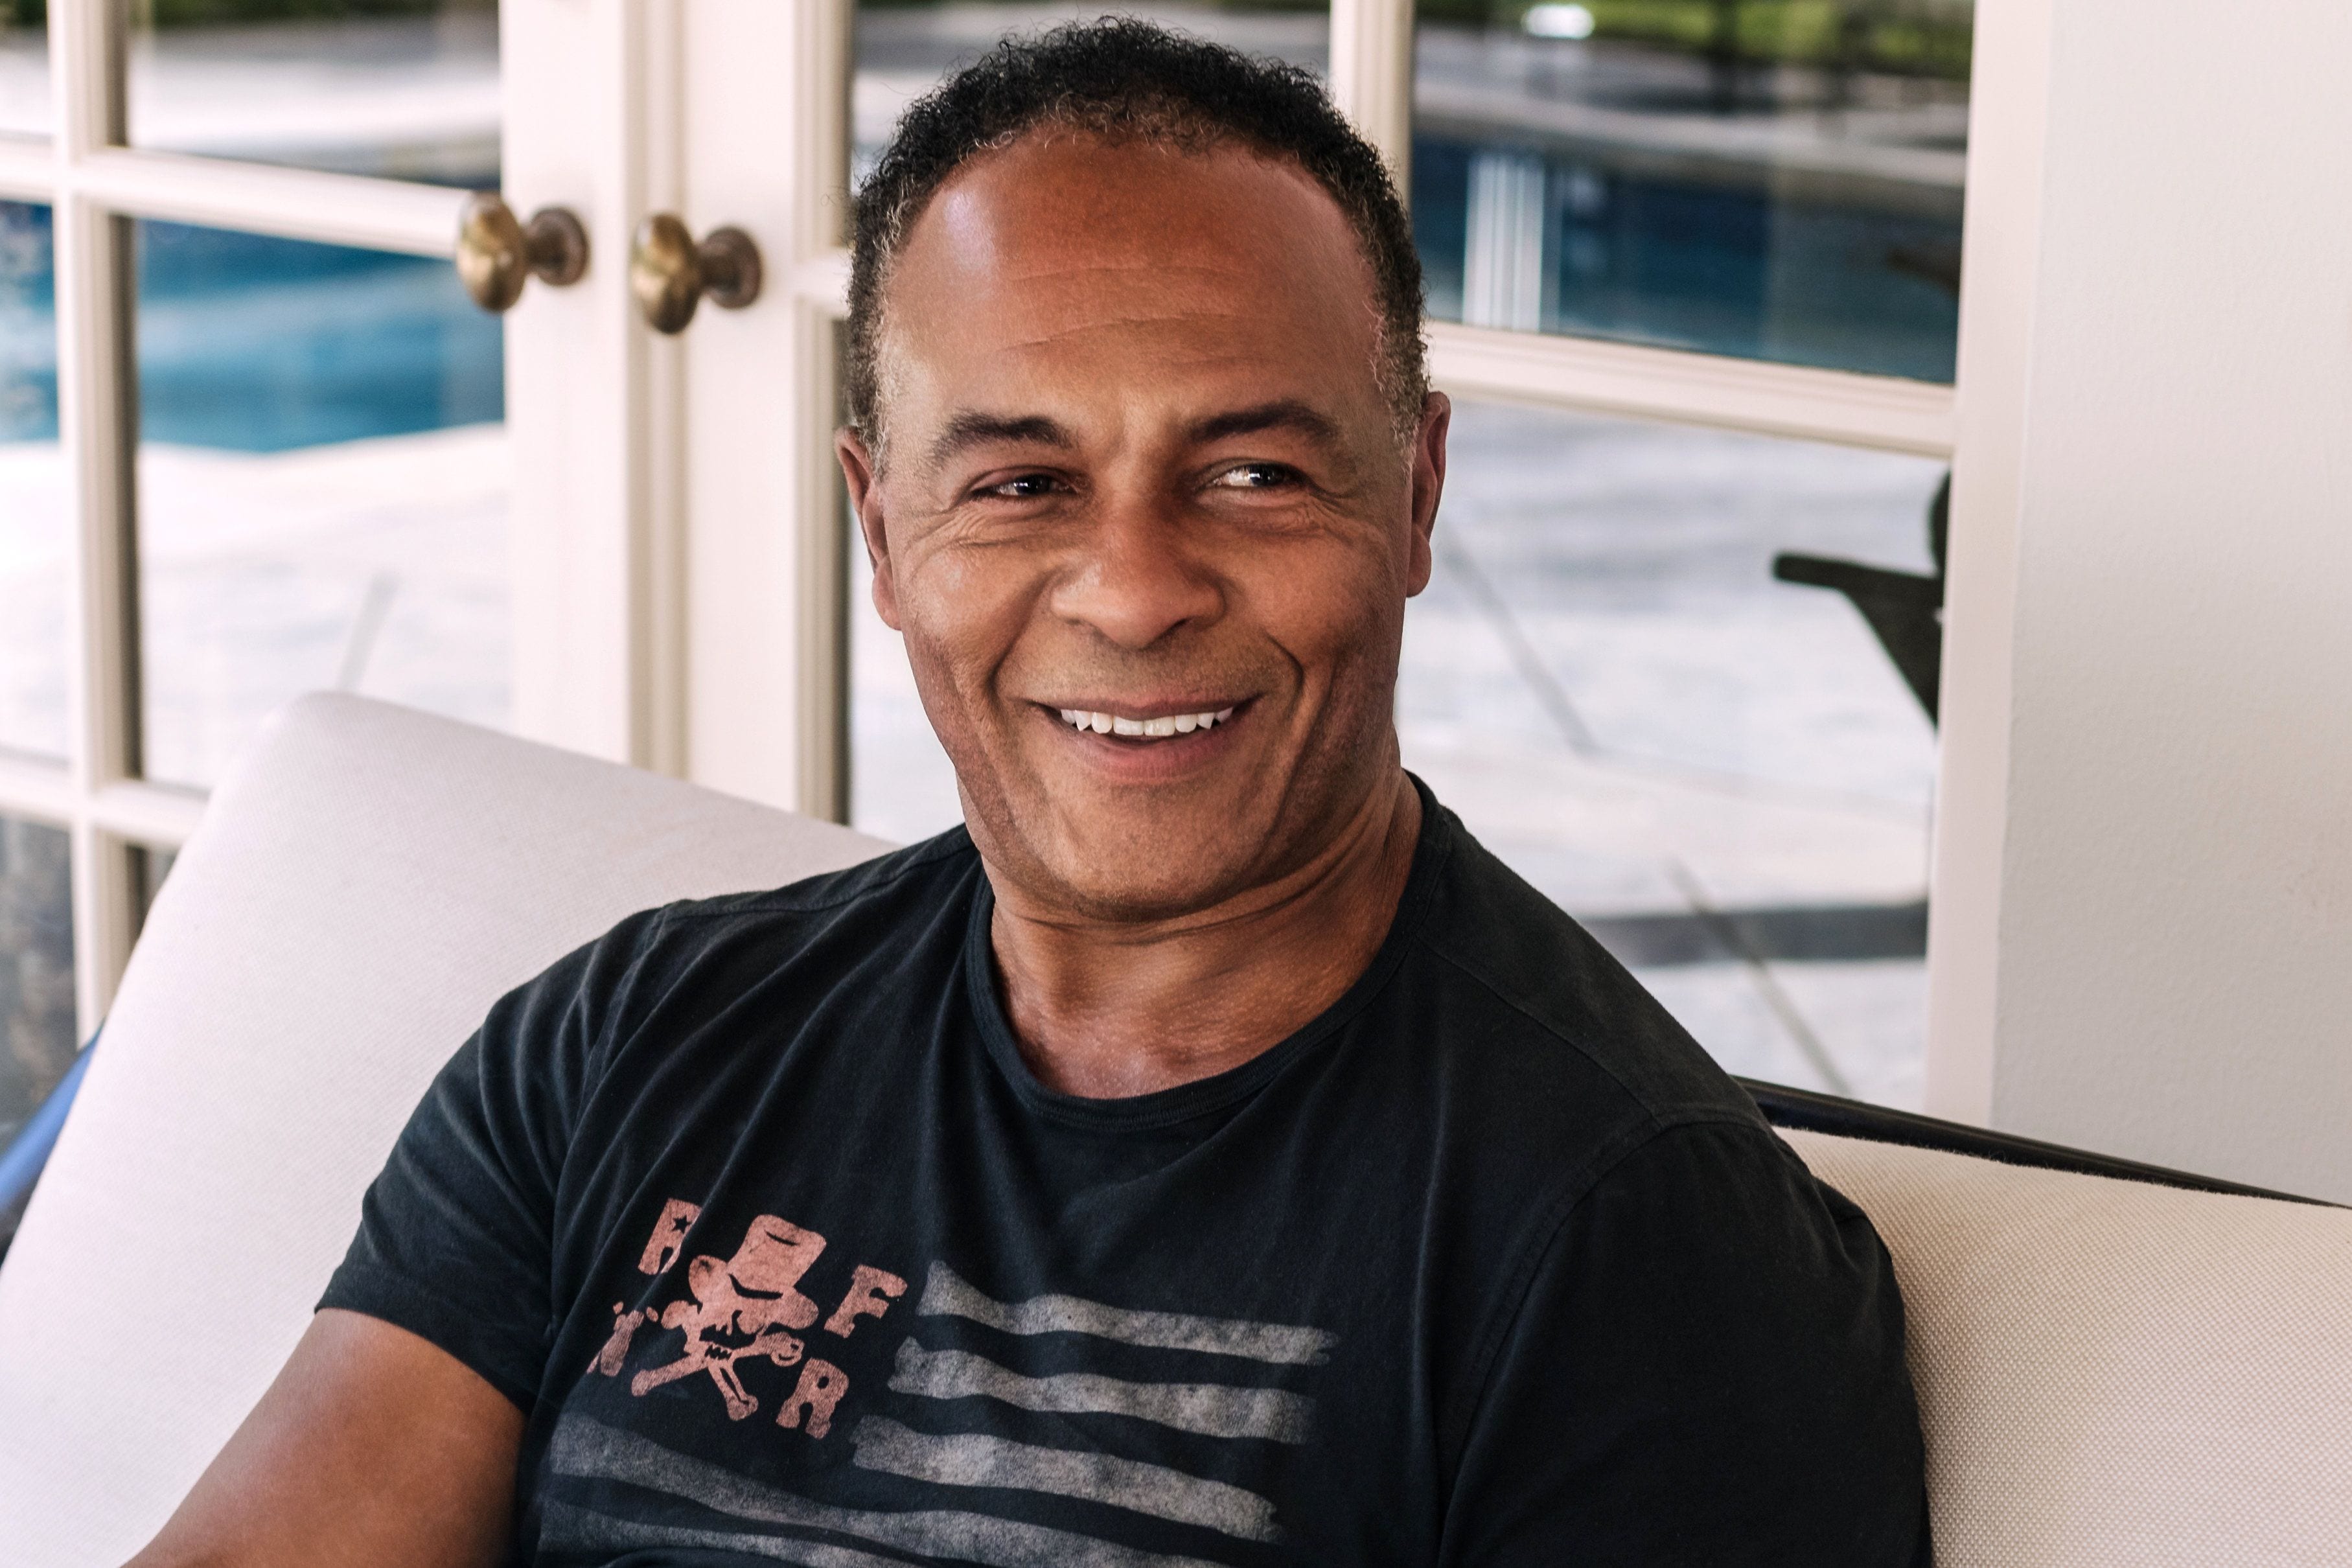 On the Raydio: An Interview with Ray Parker, Jr.